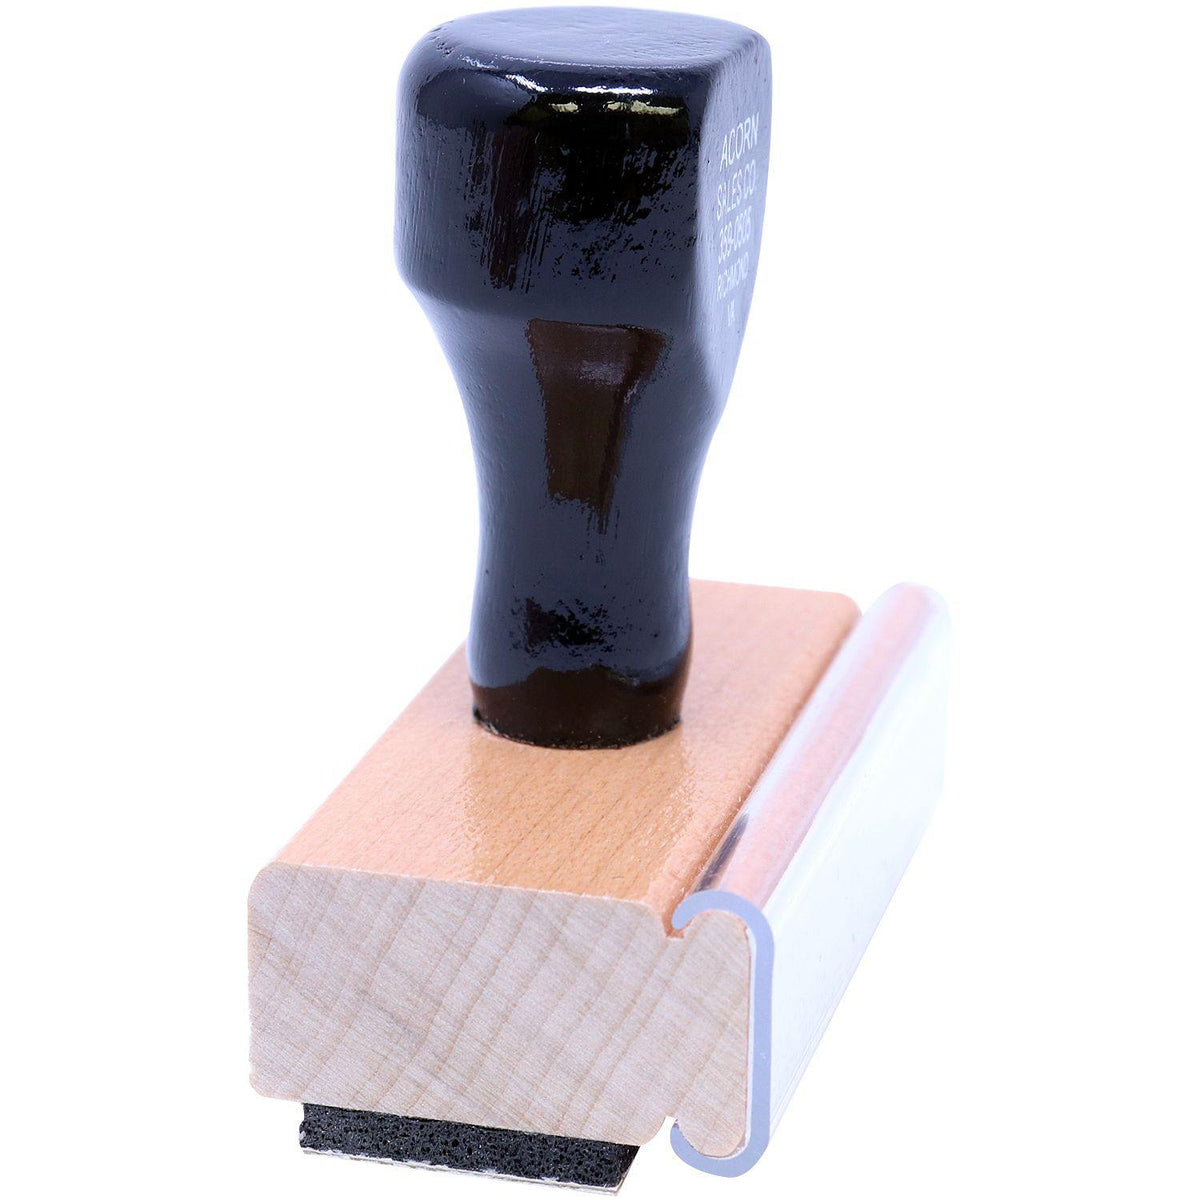 Side View of Judges Copy Legal Rubber Stamp at an Angle